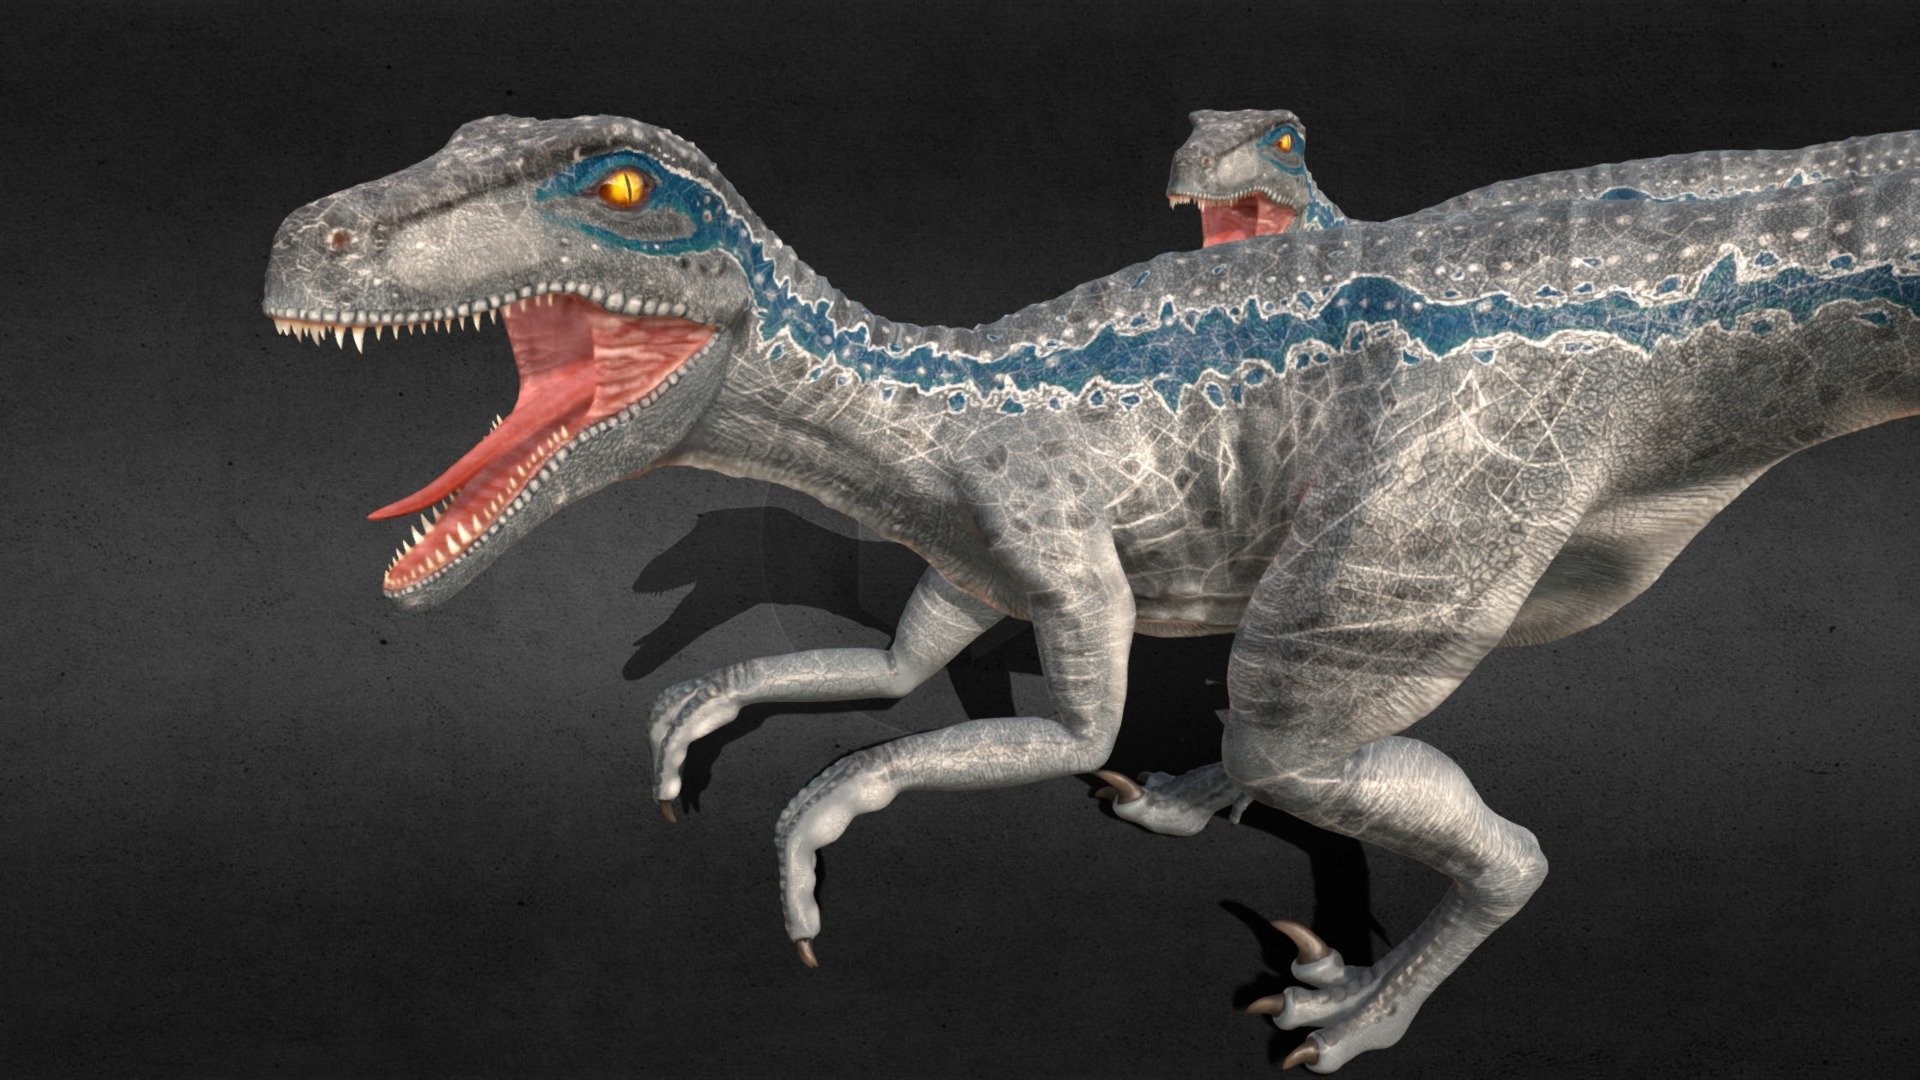 Hi,
This is my Velociraptor Blue From Jurassic world.
Sculpted in zbrush, Painted in Substance Painter, Rigged in Maya
The First Raptor is the High poly, the second is the low poly - Velociraptor - 3D model by Floris Vanderkerken (@floris_vdk) 3d model